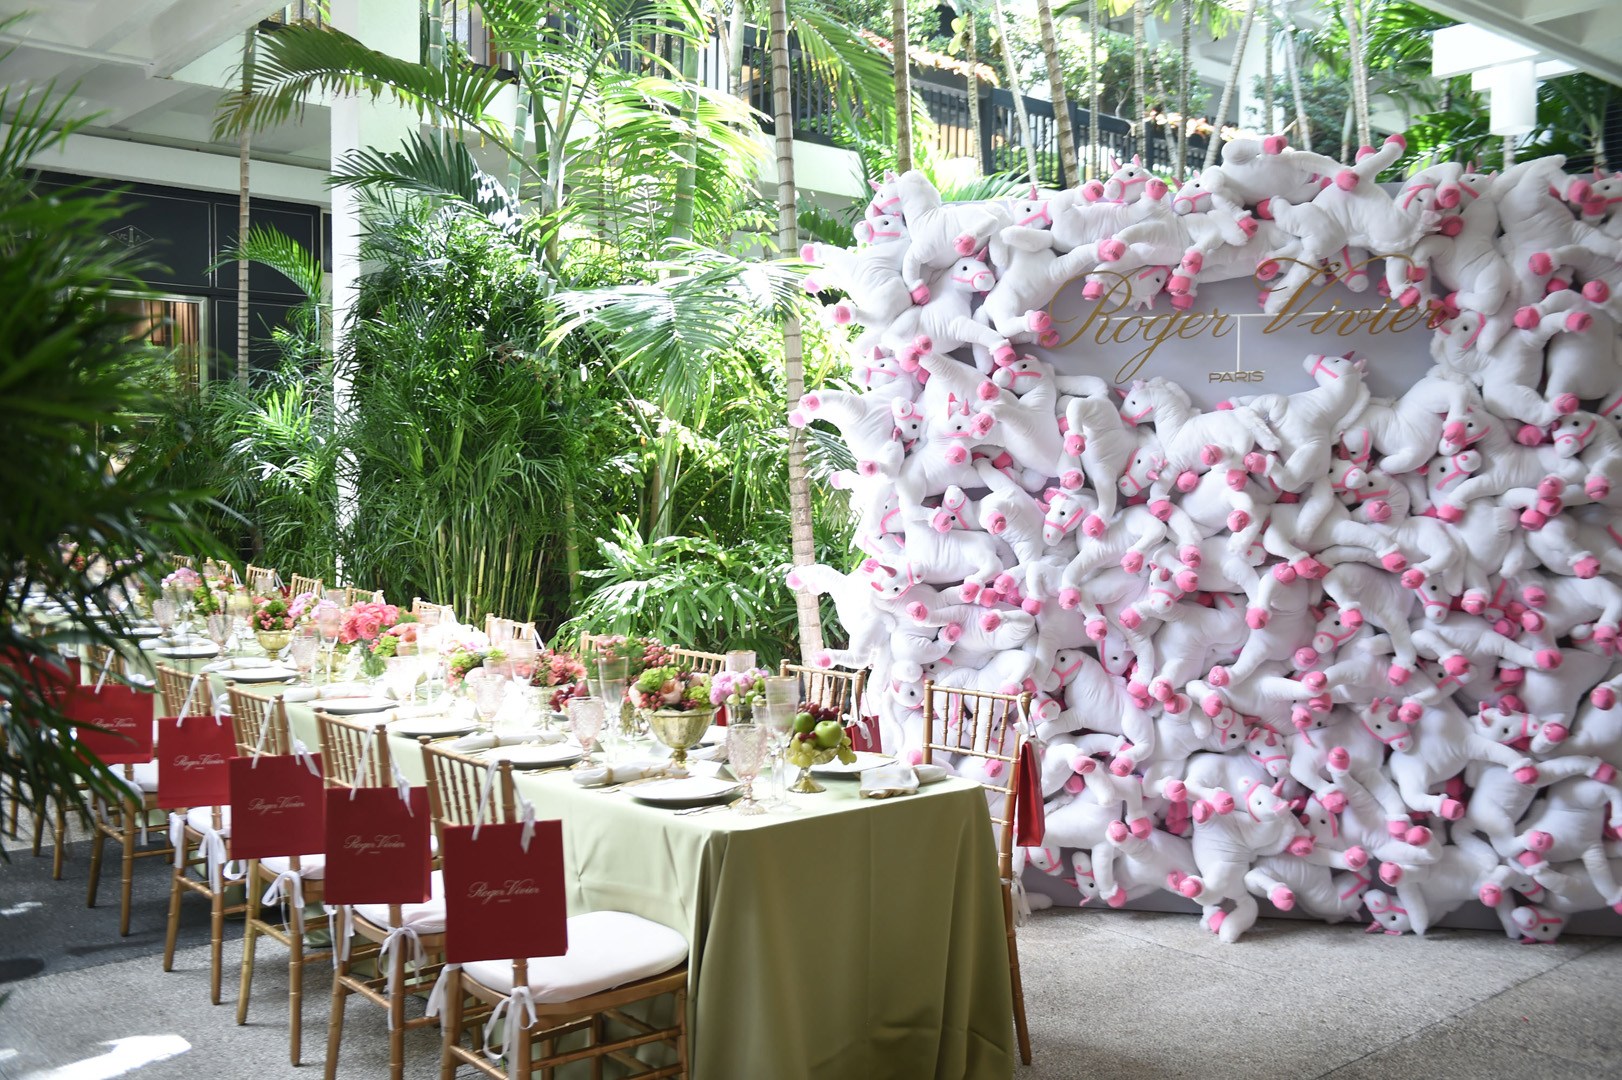 Roger vivier celebrates 10 Years at Bal Harbour Shops with a ladies luncheon alongside the launch of the Fall issue of Bal Harbour Magazine